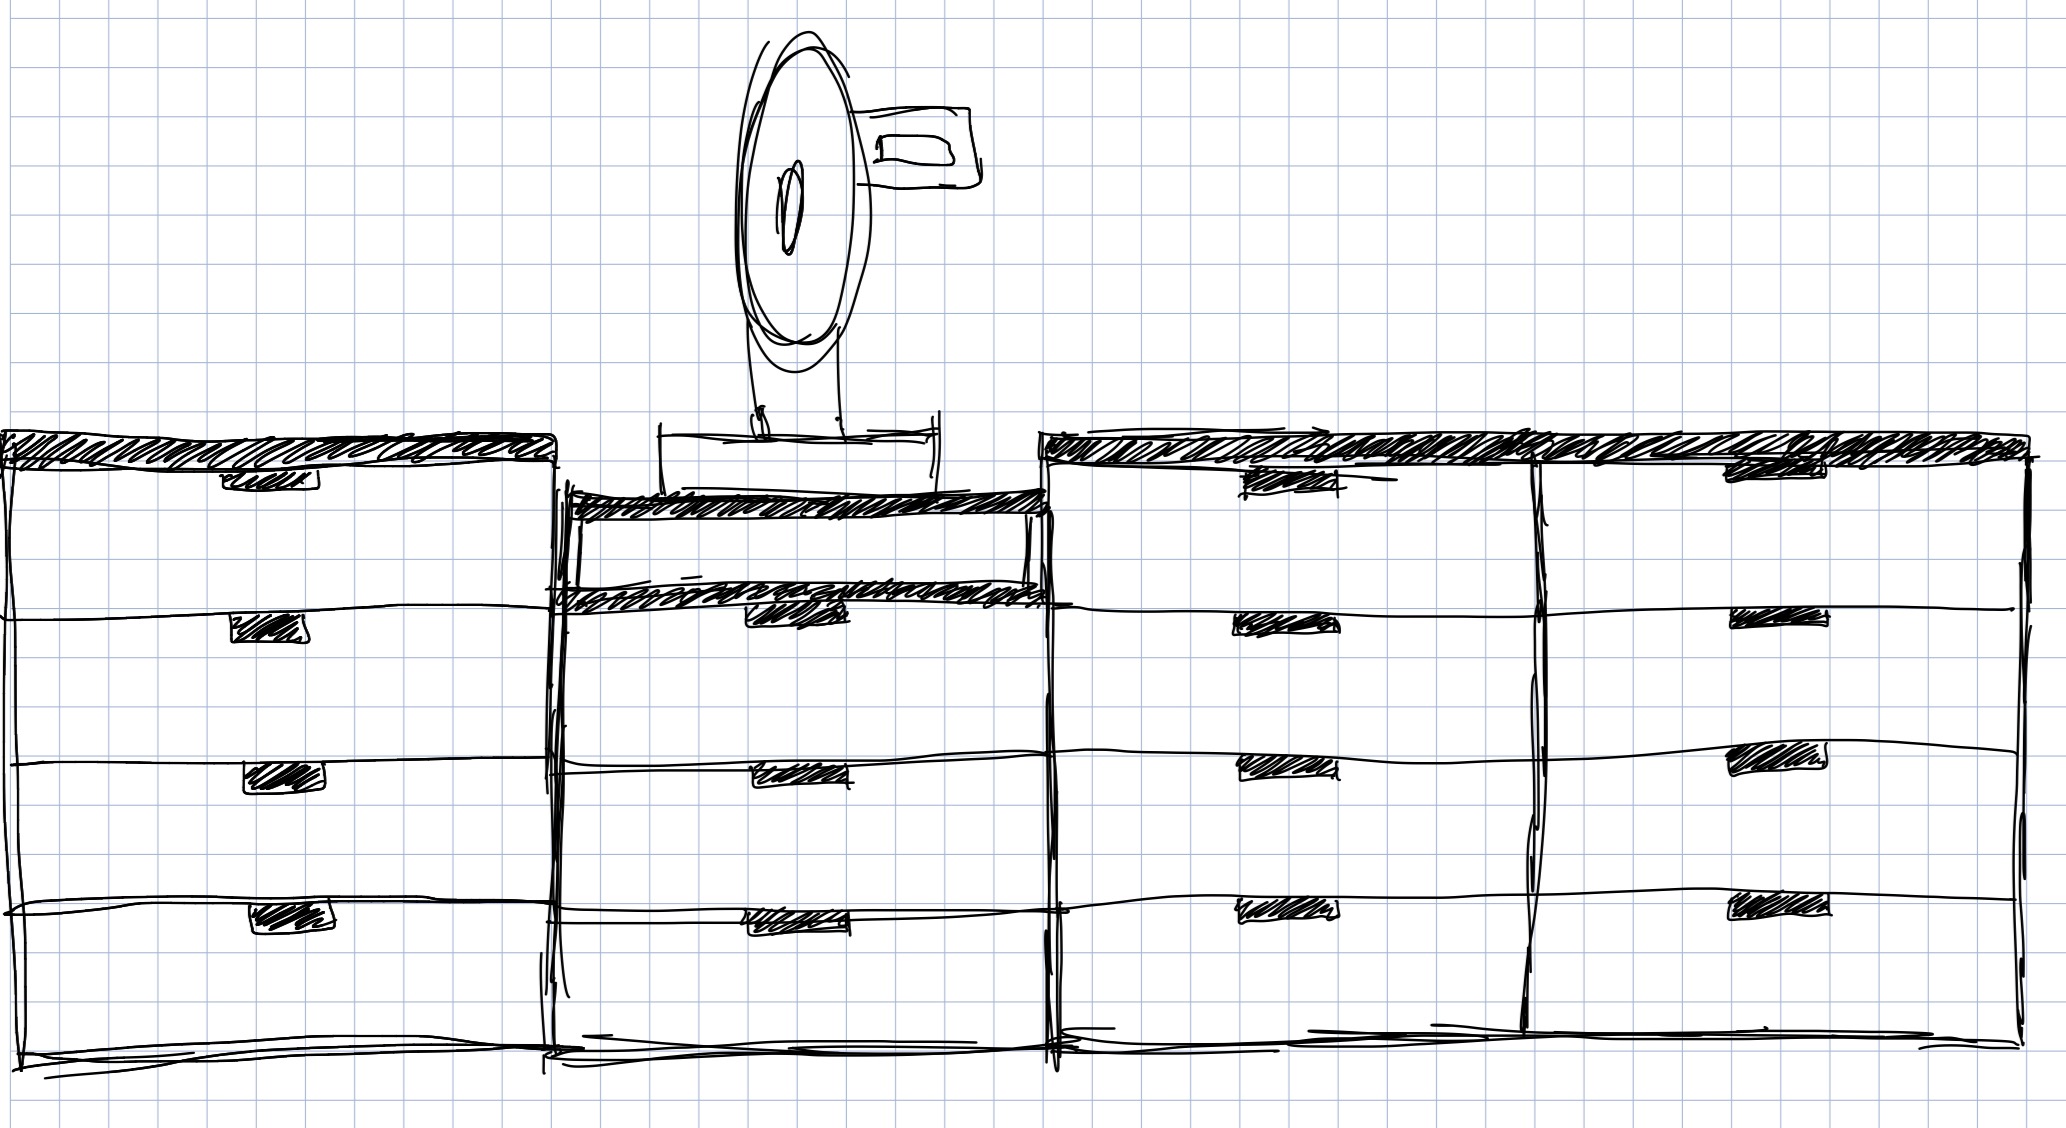 rough sketch of workbench